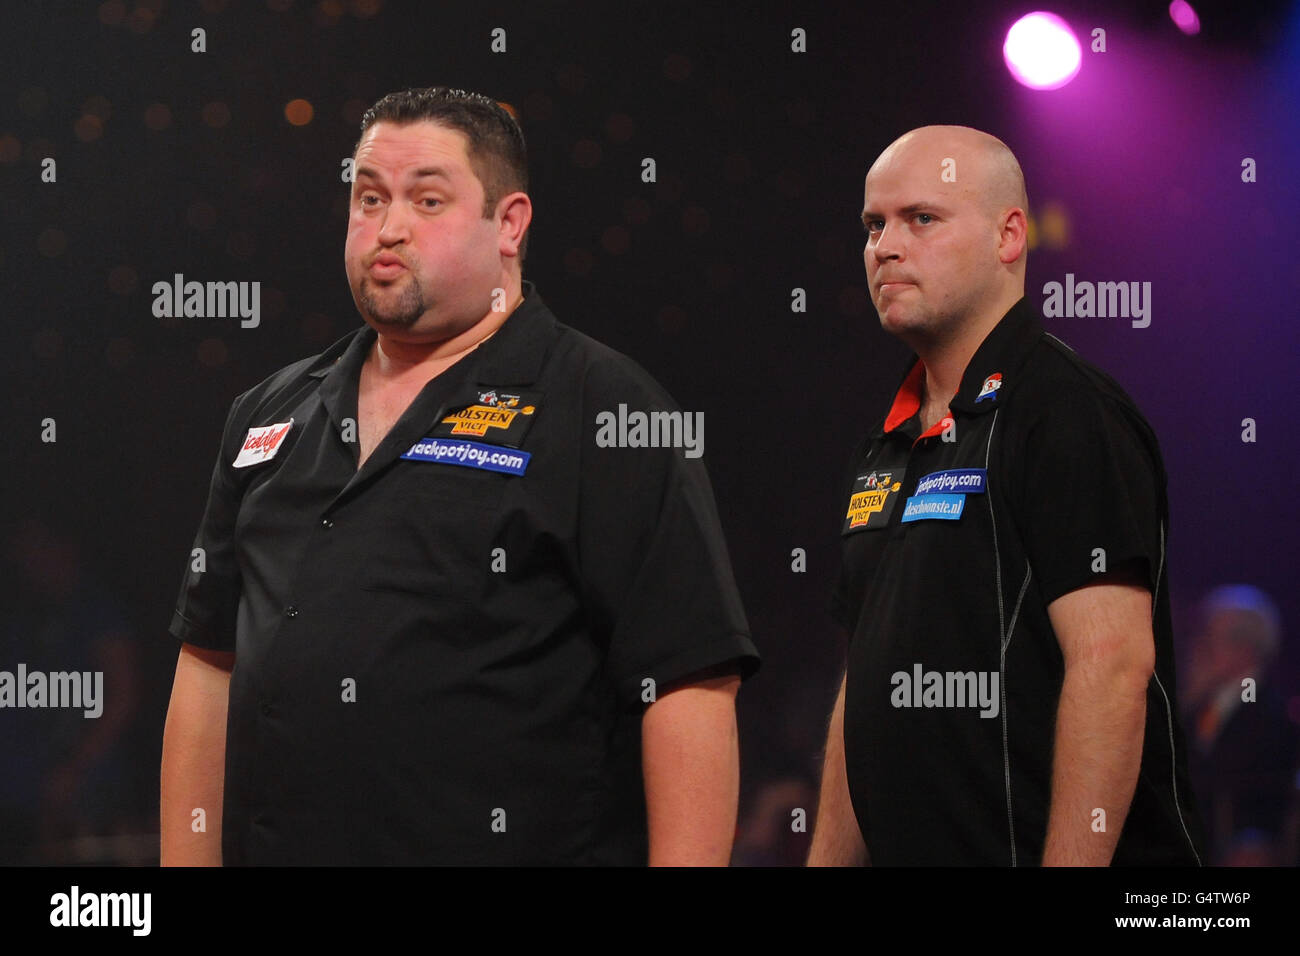 England's Alan Norris and Netherland's Christian Kist in the quarter finals of the BDO World Professional Darts Championships at the Lakeside Complex, Surrey. Stock Photo